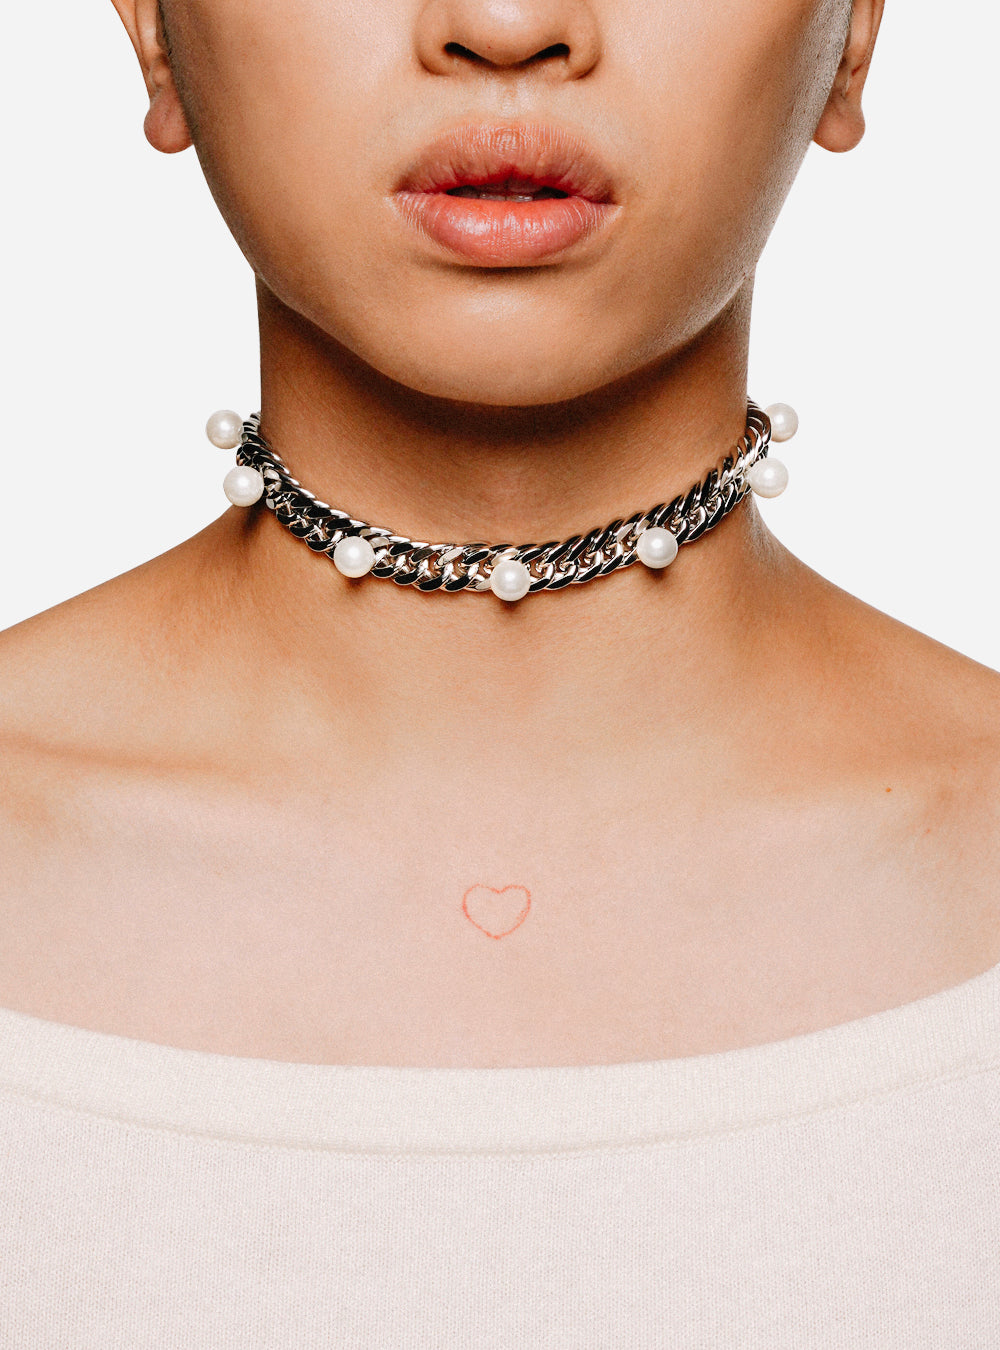 A woman wearing a "Pearls on curb-chain choker necklace" by MIDNIGHTFACTORY, with a heart on it.